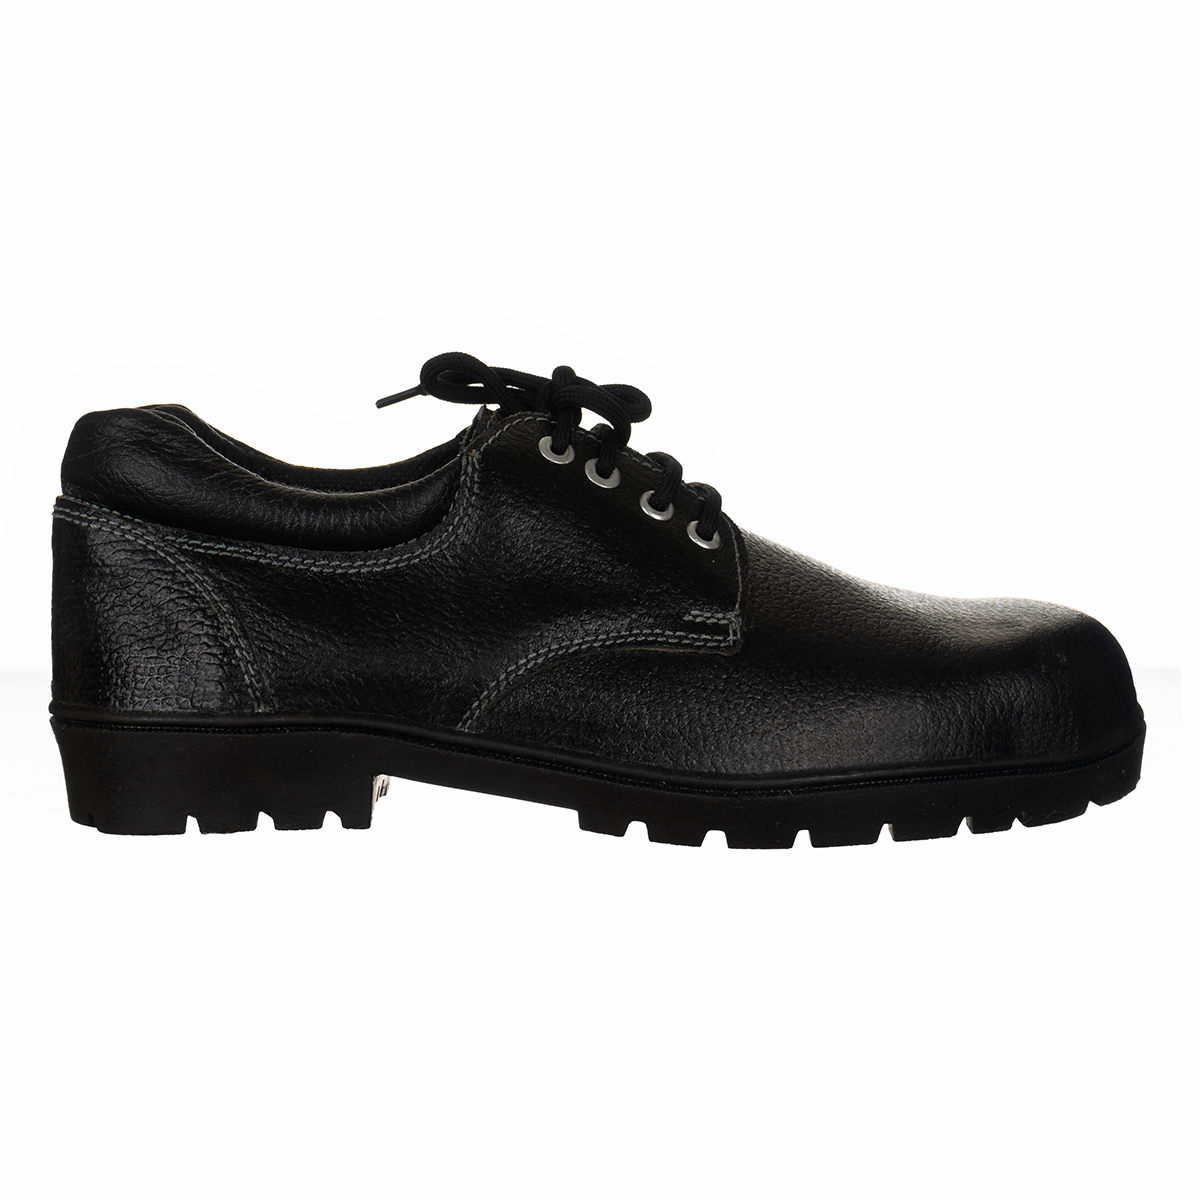 Leather Safety Shoes Manufacturers, Suppliers in Pune